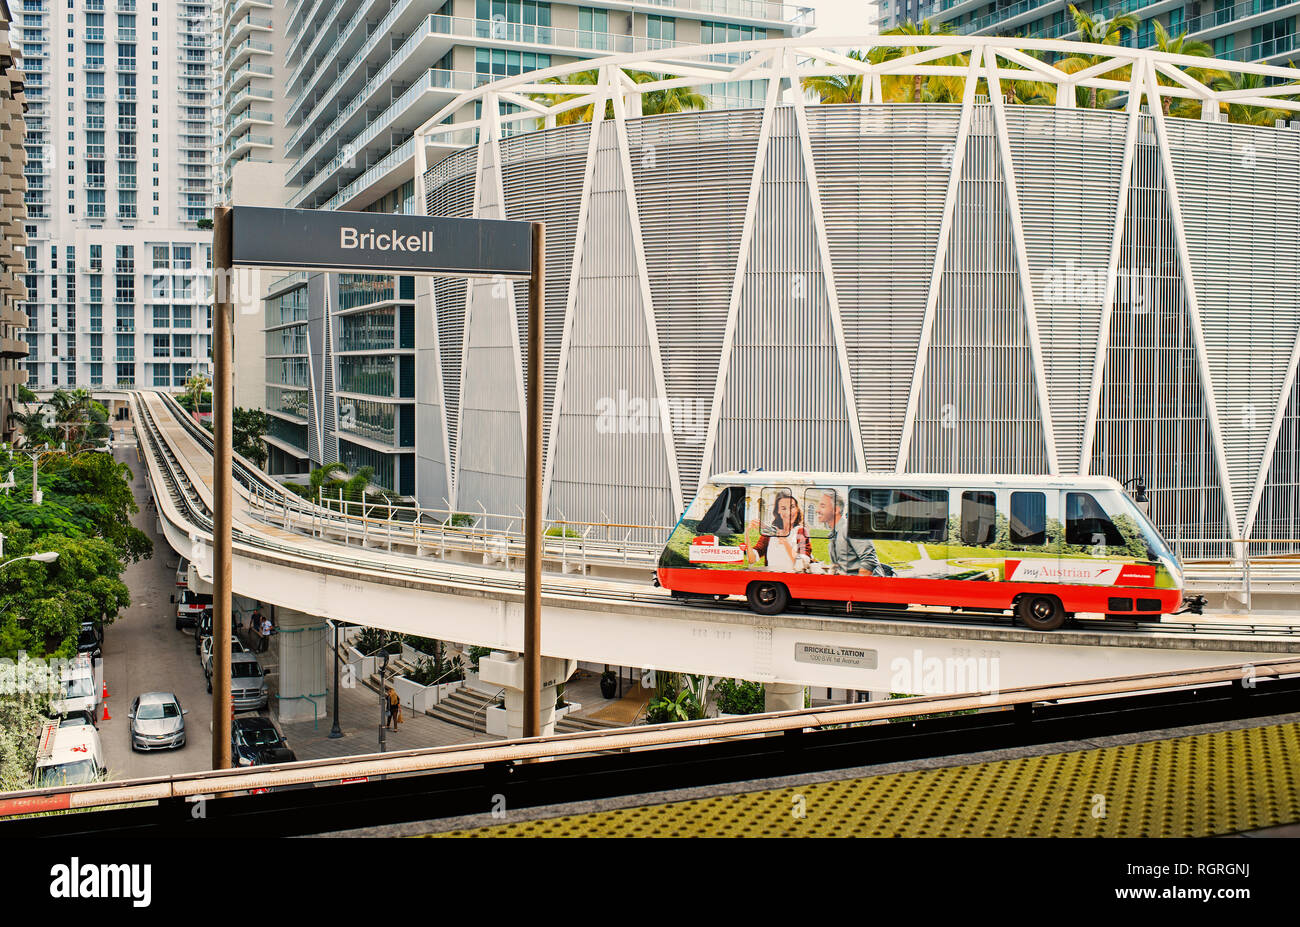 Miami, USA - October 30, 2015: train arrive at brickell station with downtown skyscrapers on urban background. Metrorail or metro rail transit system on cityscape. Metropolitan transport service. Stock Photo